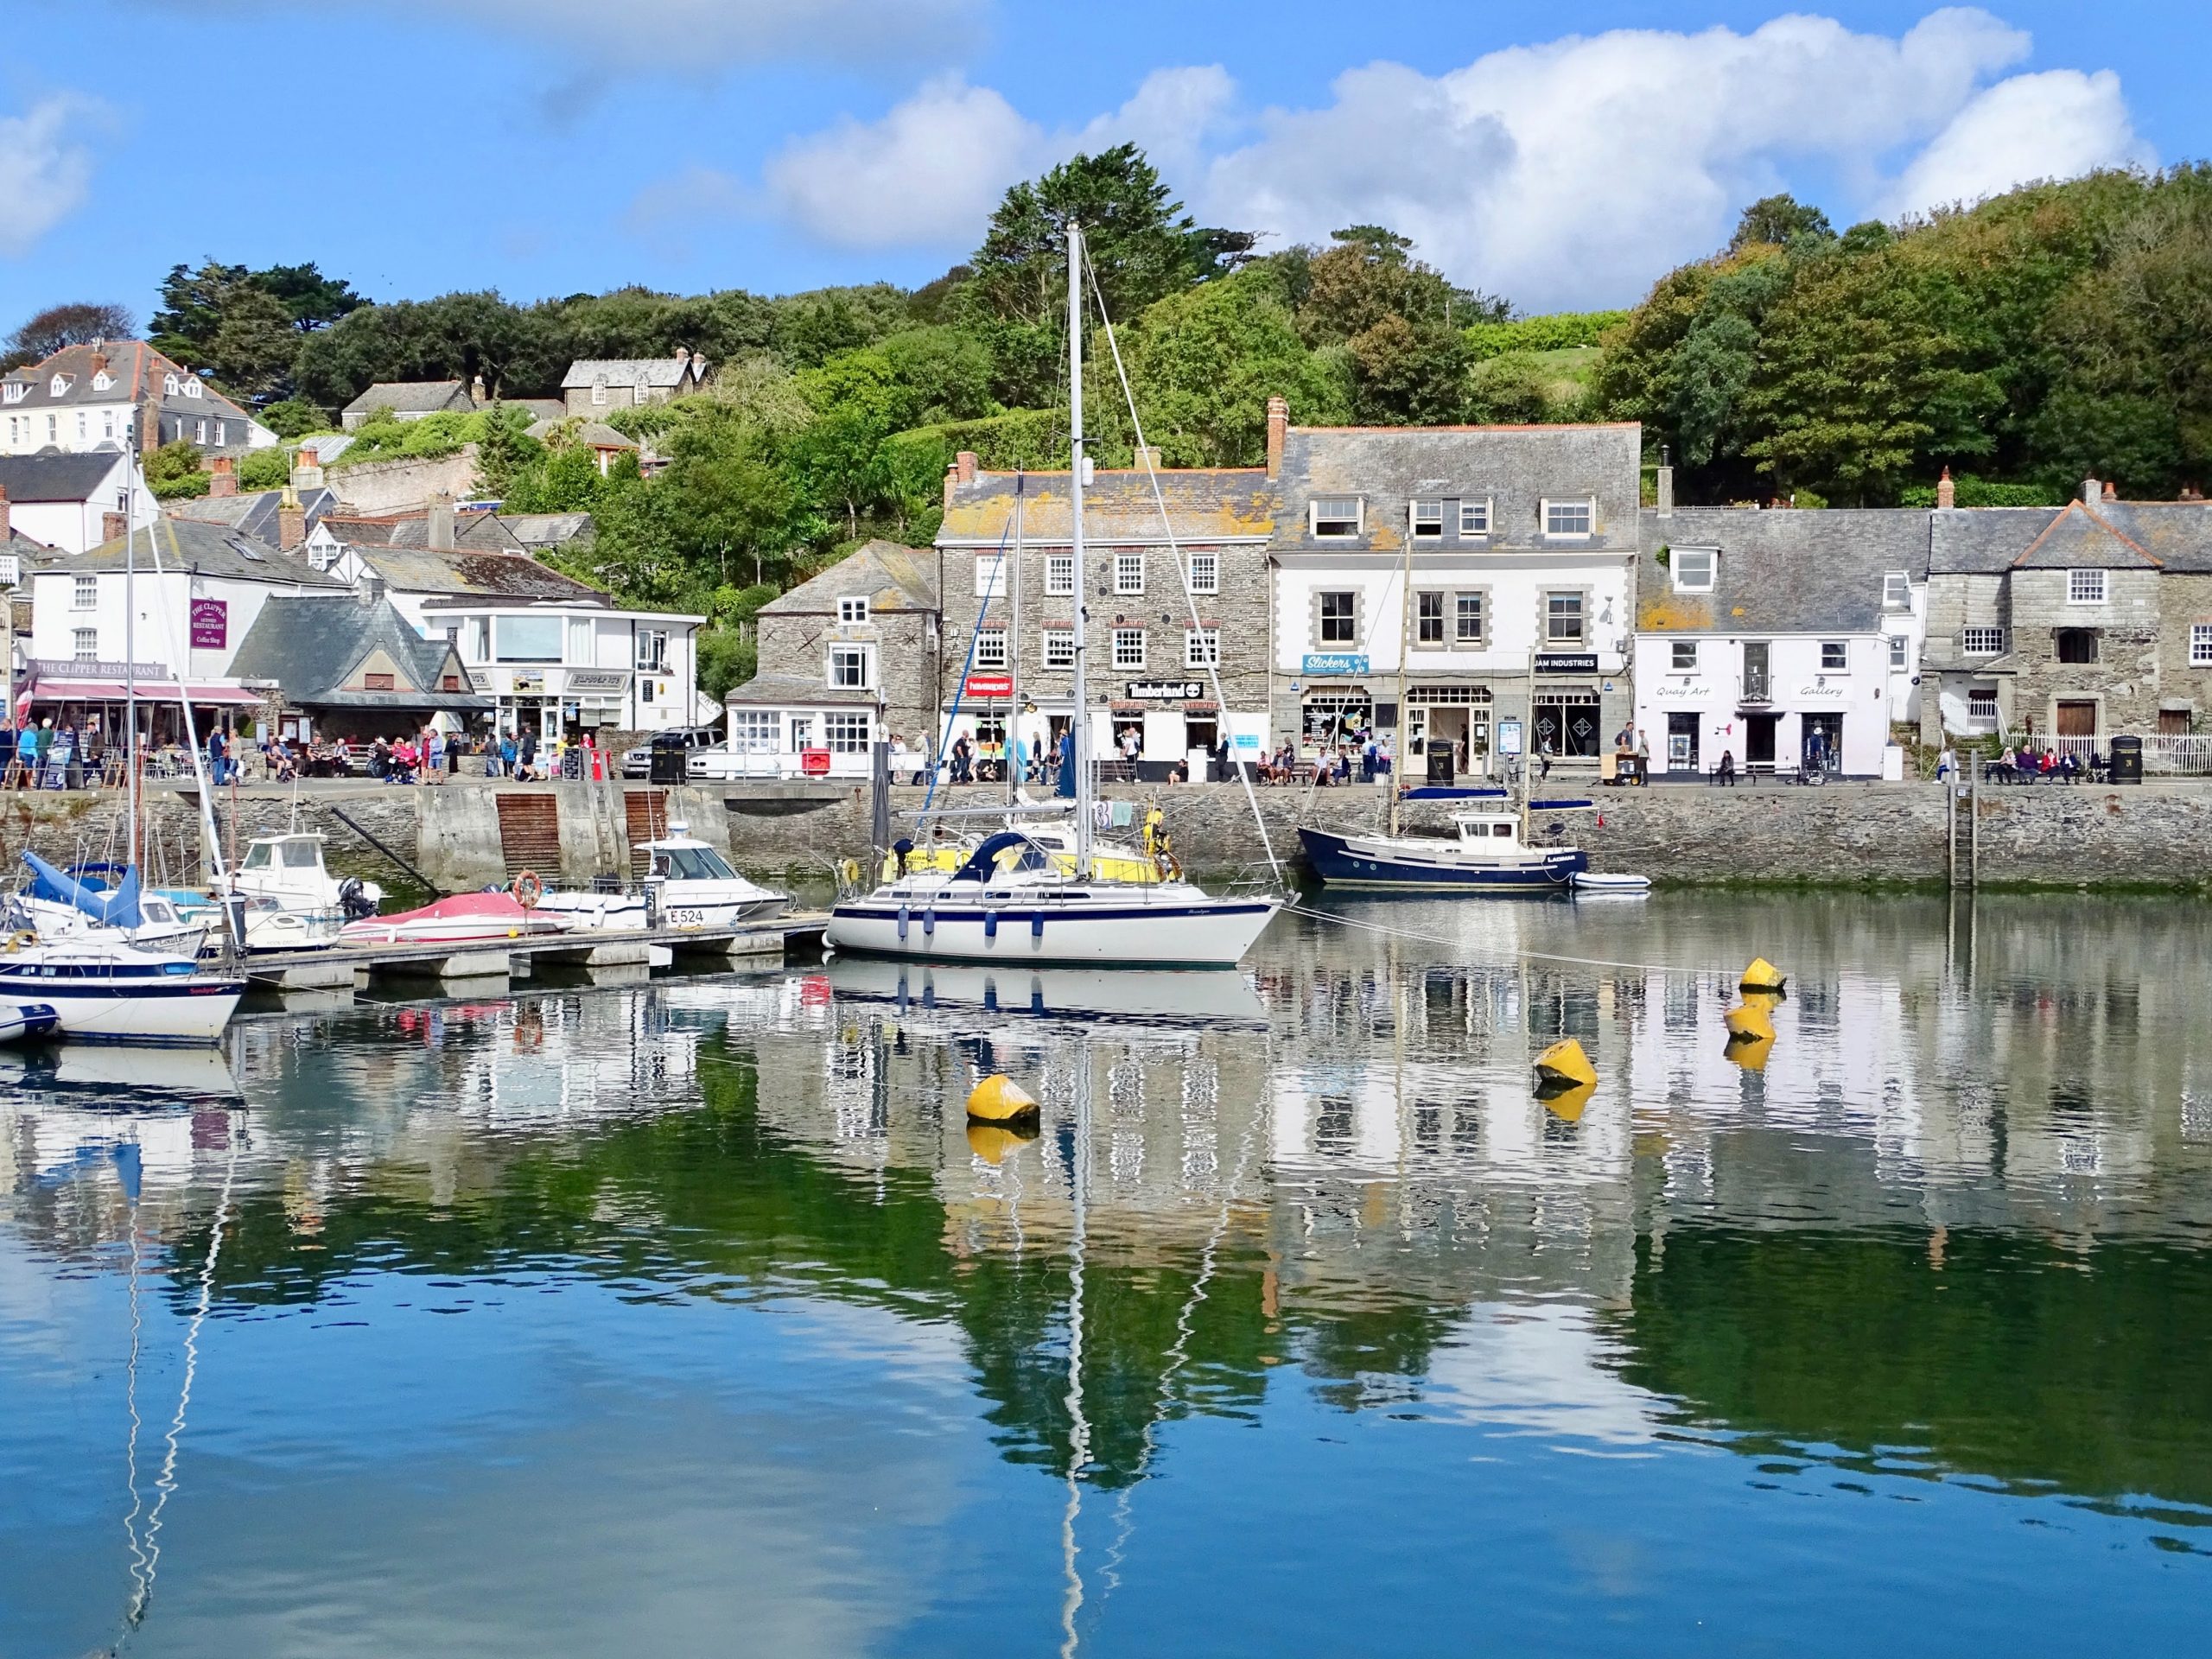 Town of Padstow in Cornwall